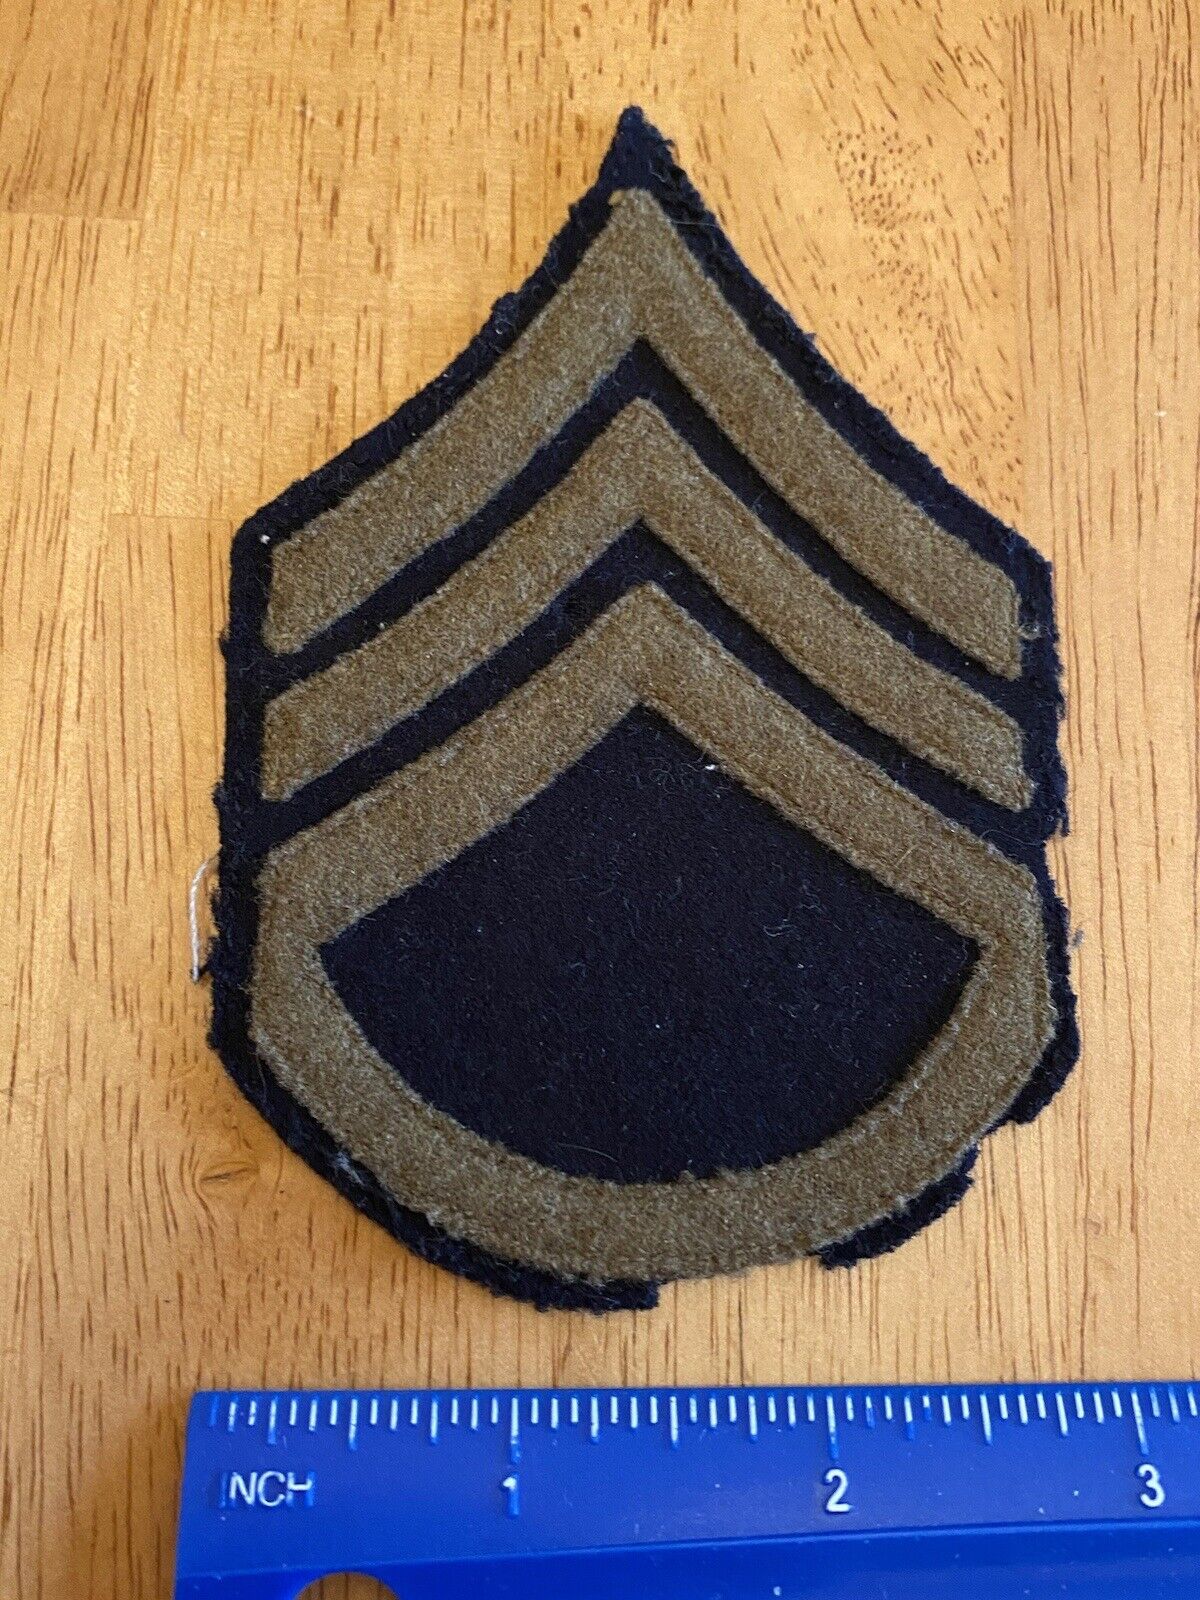 Inter War 1920’s-30’s US Army Sergeant Enlisted Rank Insignia Patch Felt INV1566